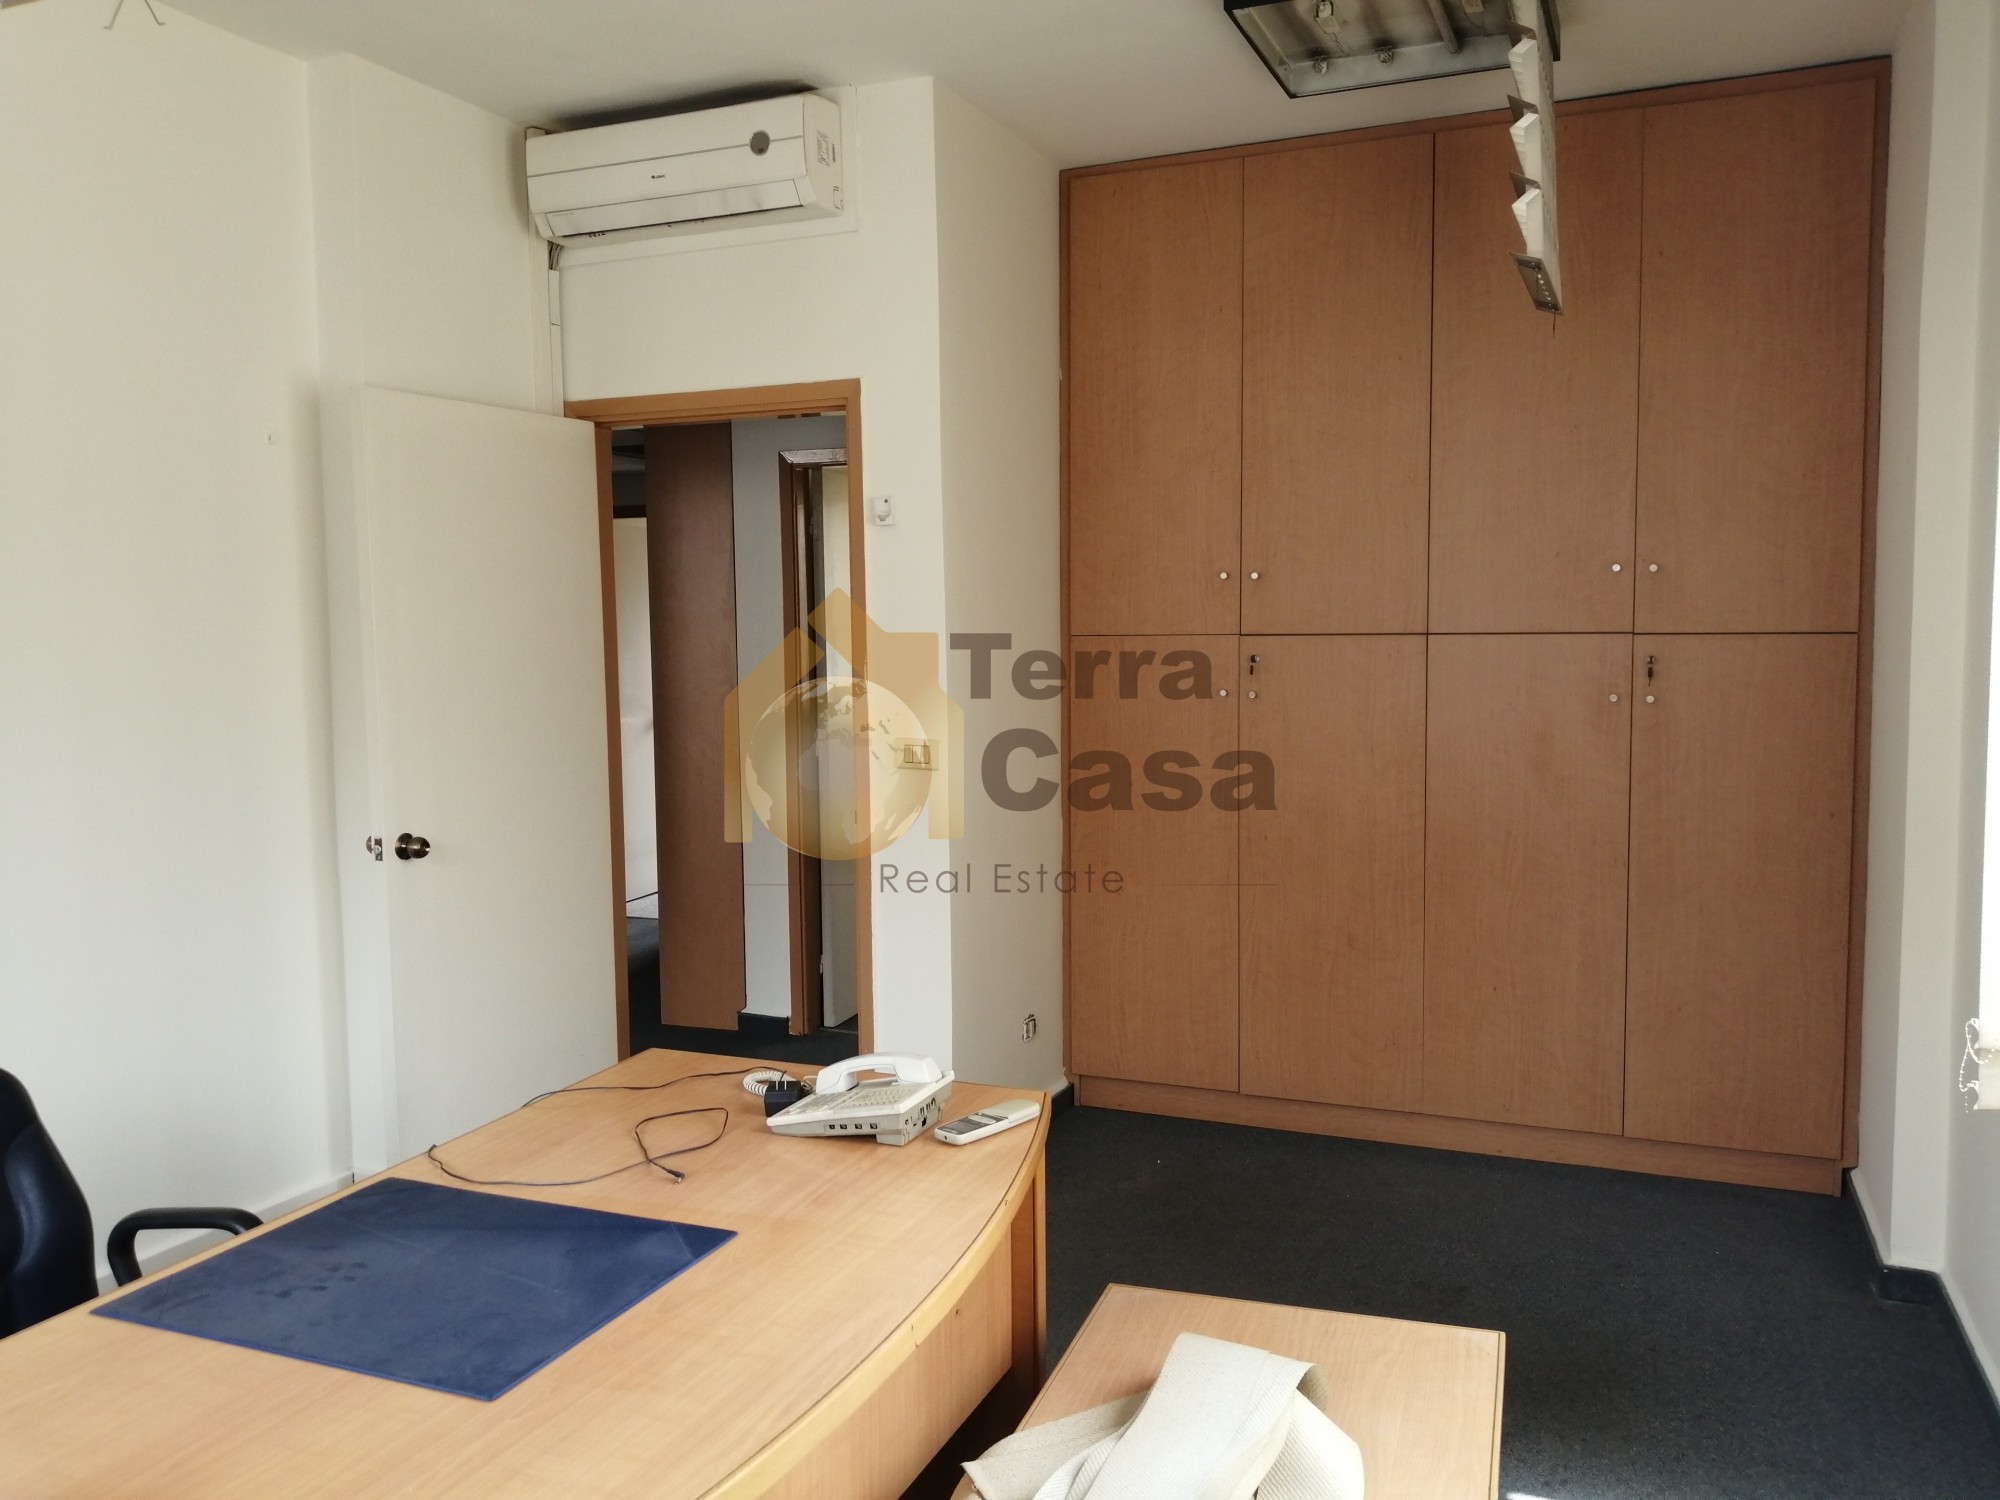 Office for sale in zalka prime location banker cheque.